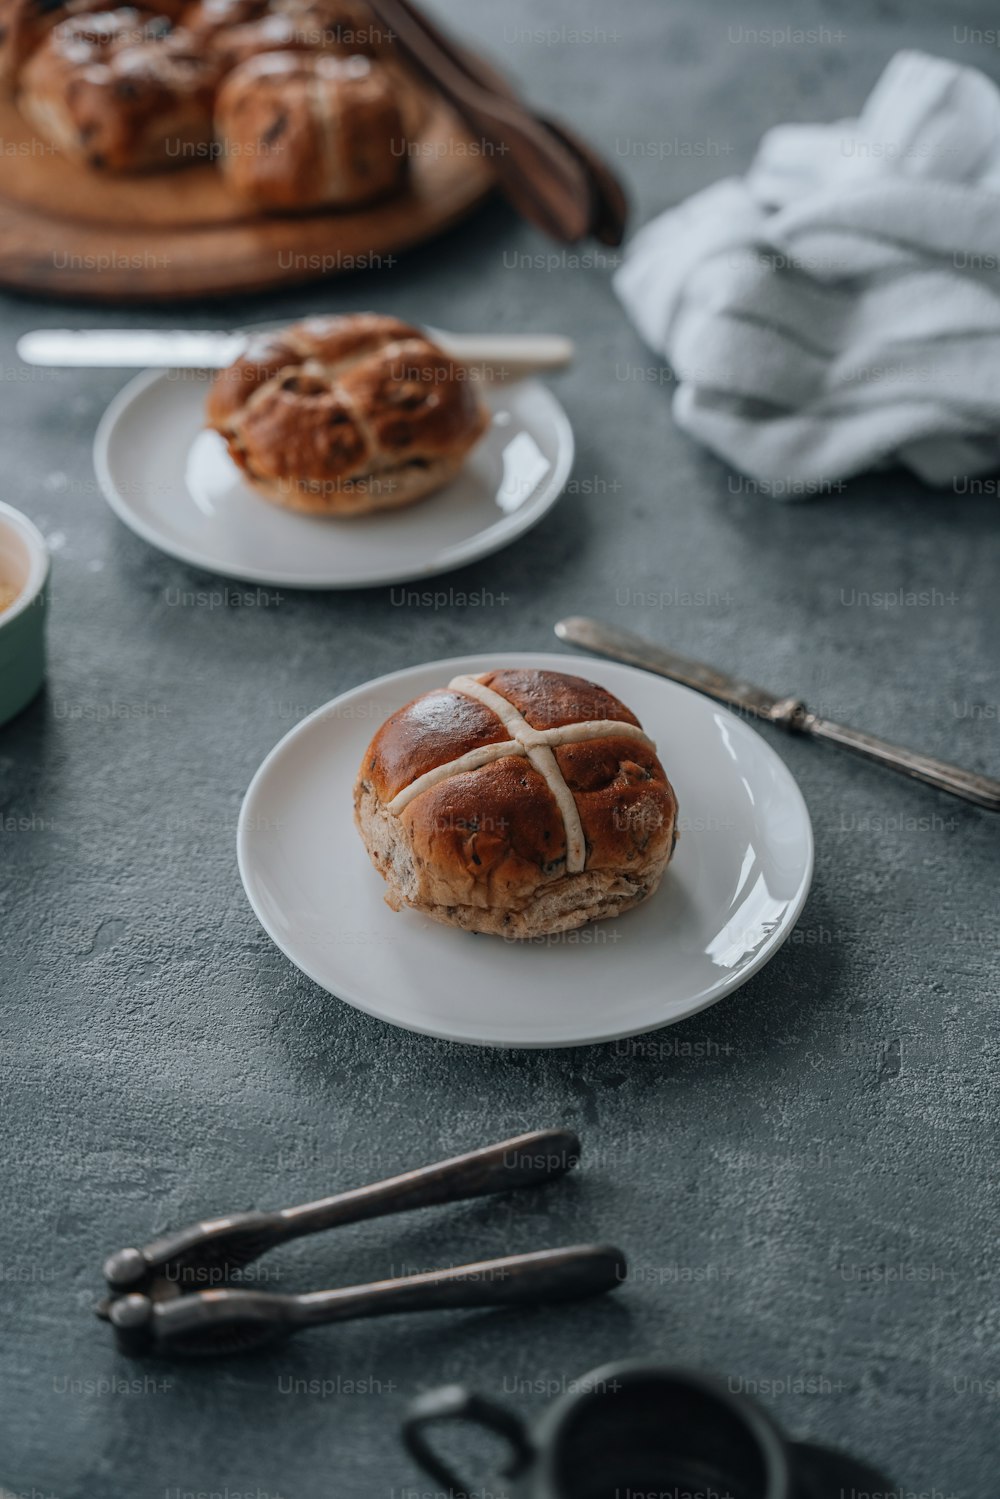 a hot cross bun on a plate next to a cup of coffee